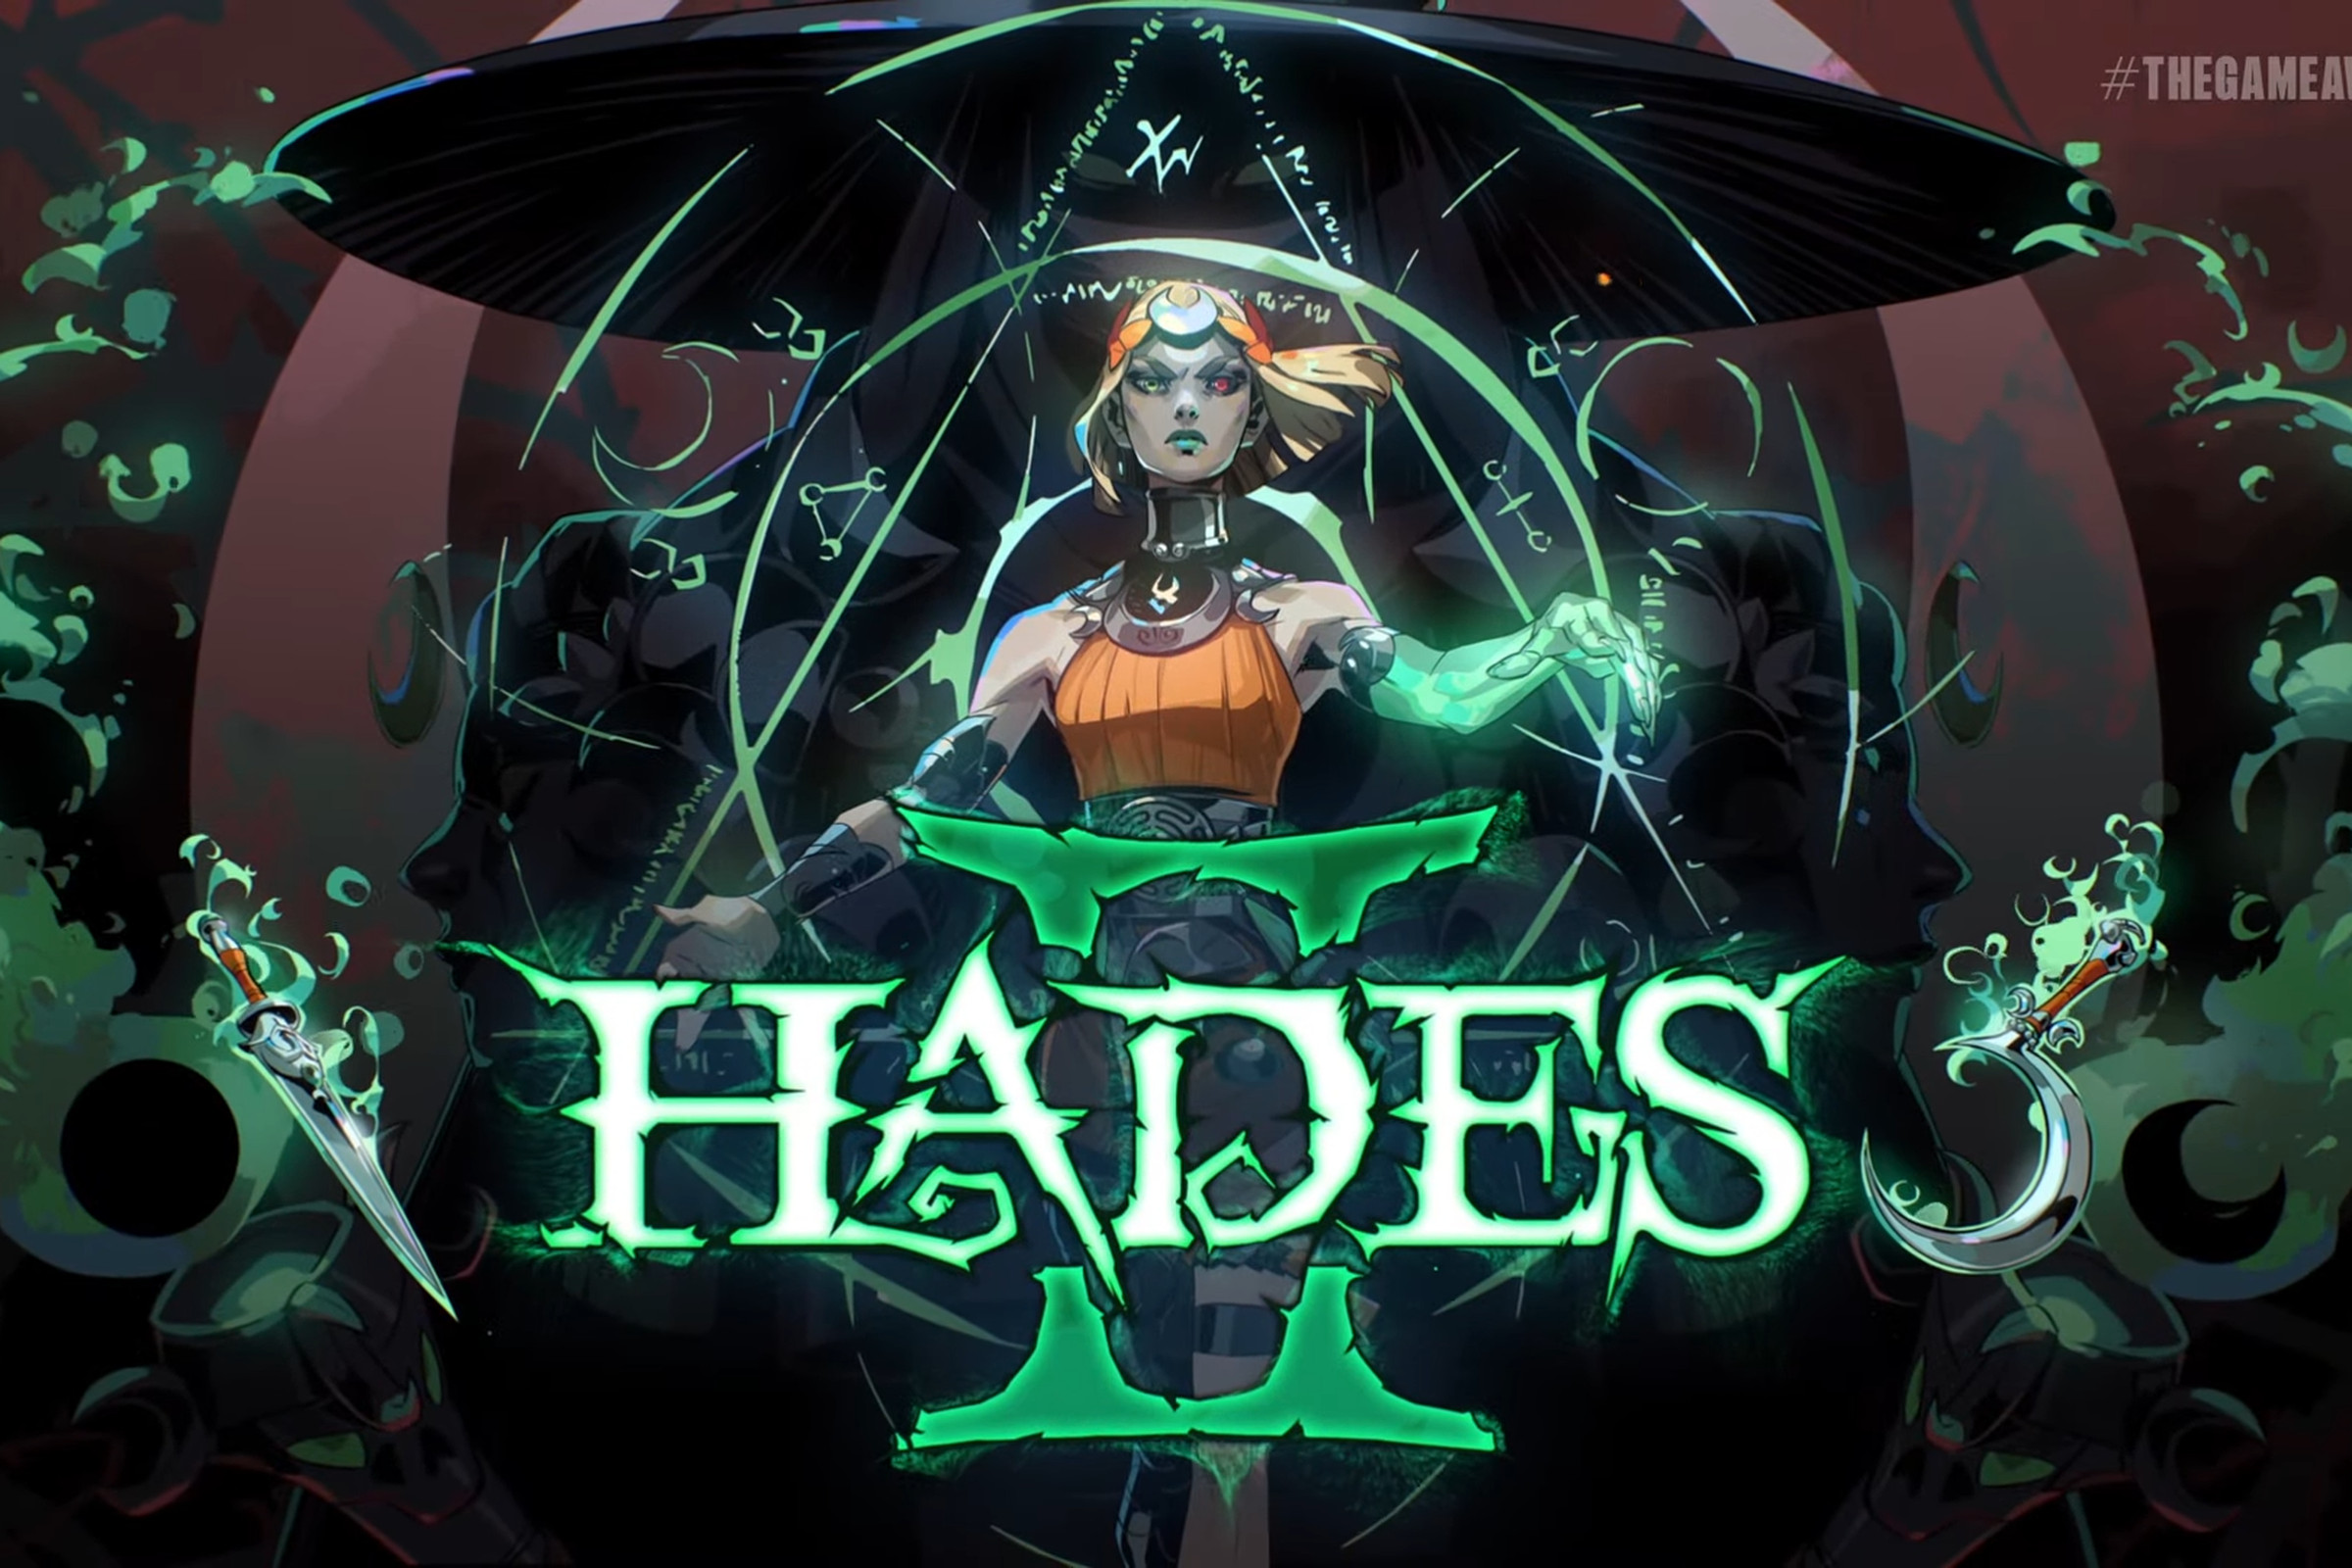 A screenshot from the first trailer for Hades II.